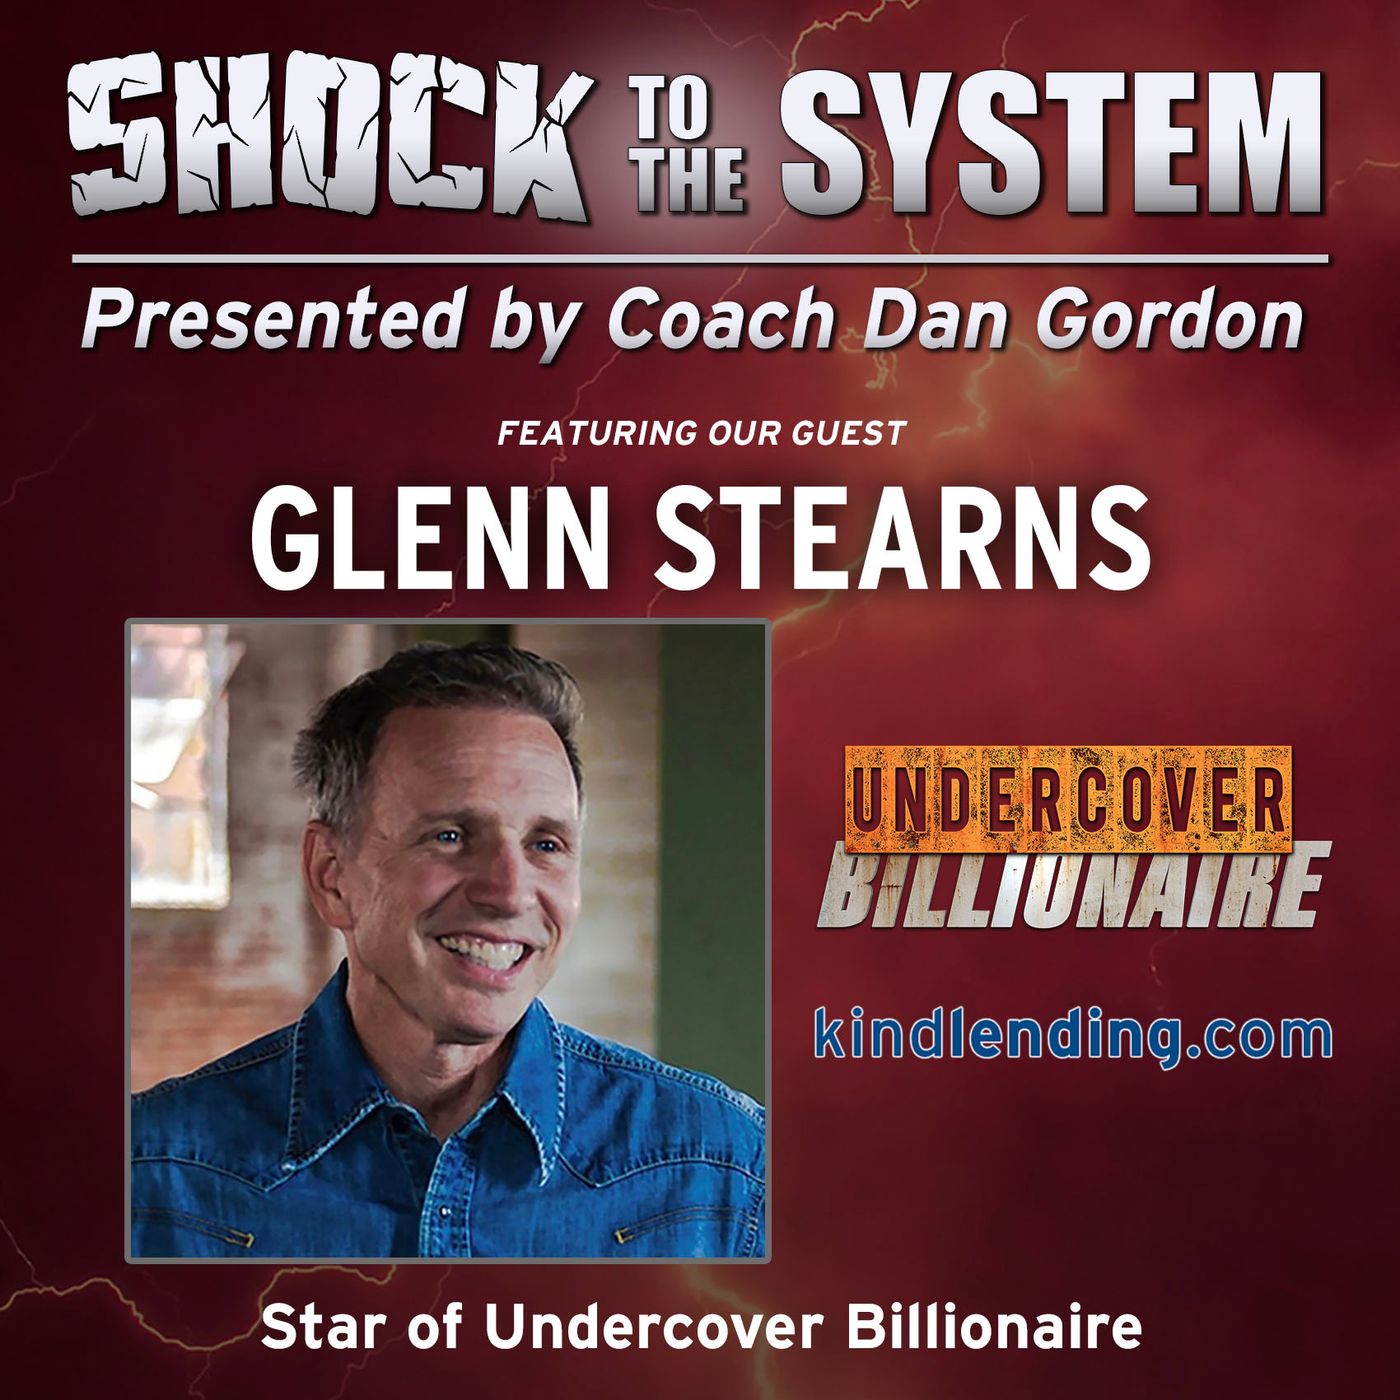 Glenn Stearns - The Undercover Billionaire on Shock to the System Podcast with Coach Dan Gordon